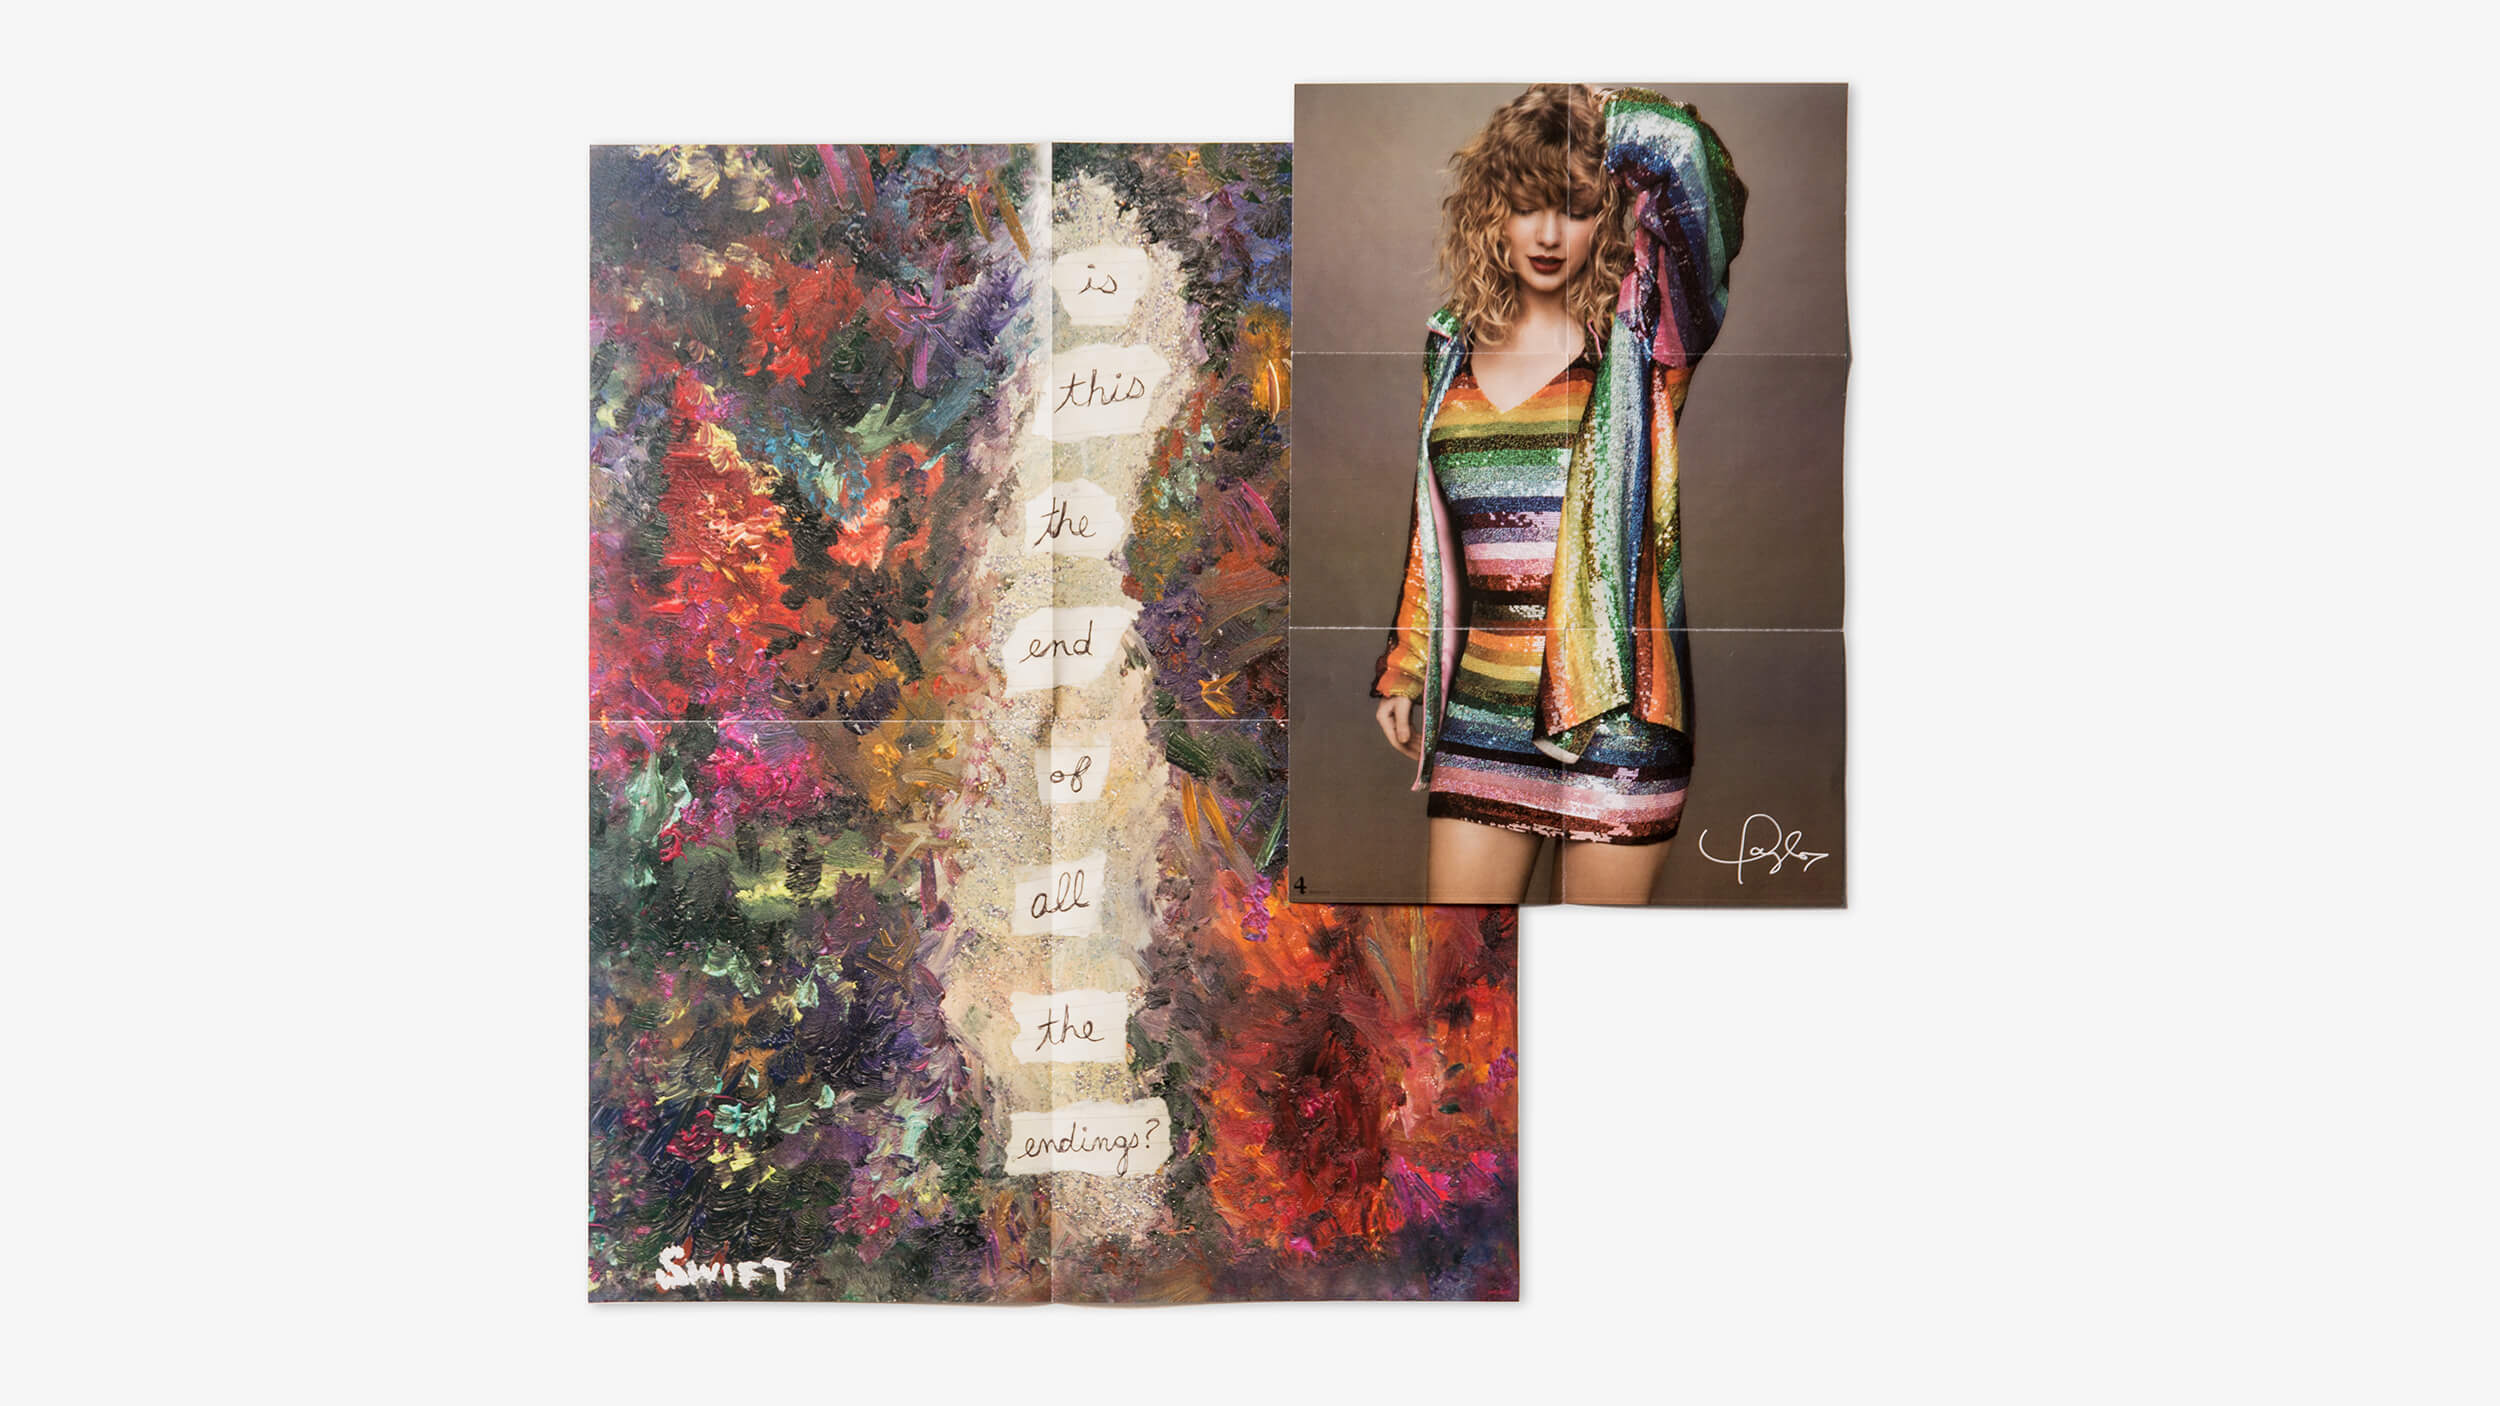 image of reputation posters featuring Taylor Swift artwork and fashion photo